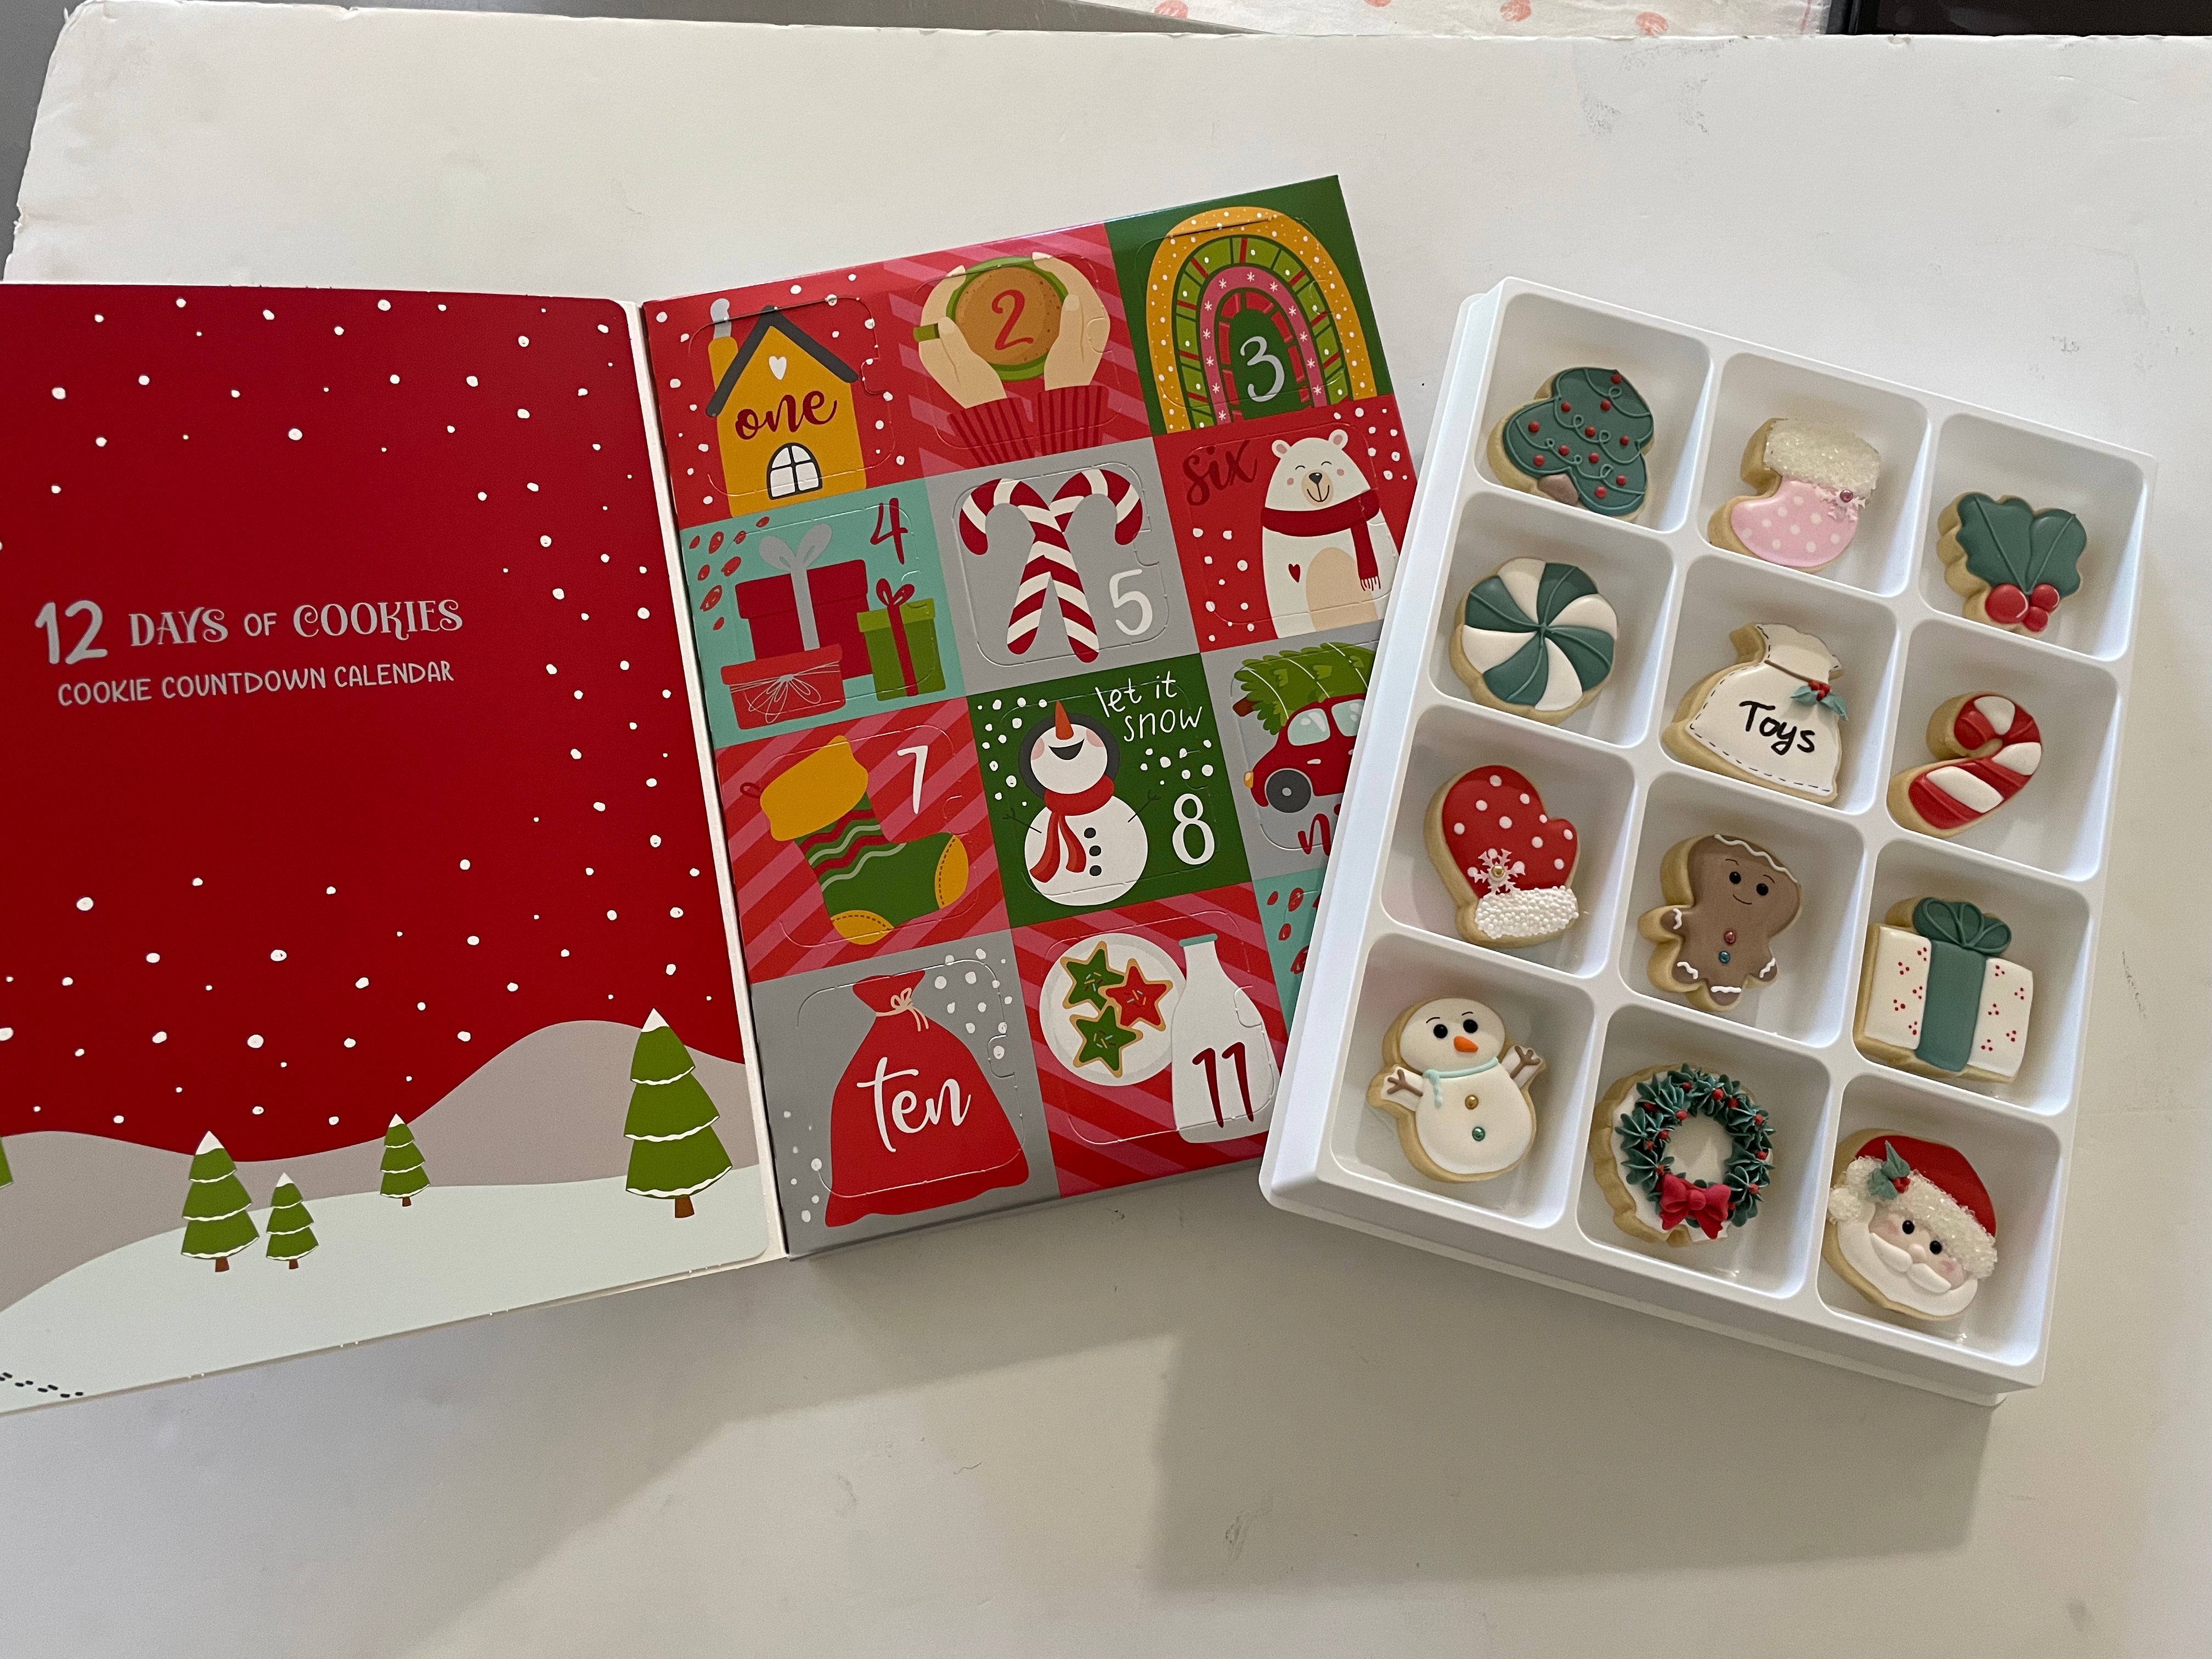 12 Days of Christmas Royal Icing Advent Cookie Calendar